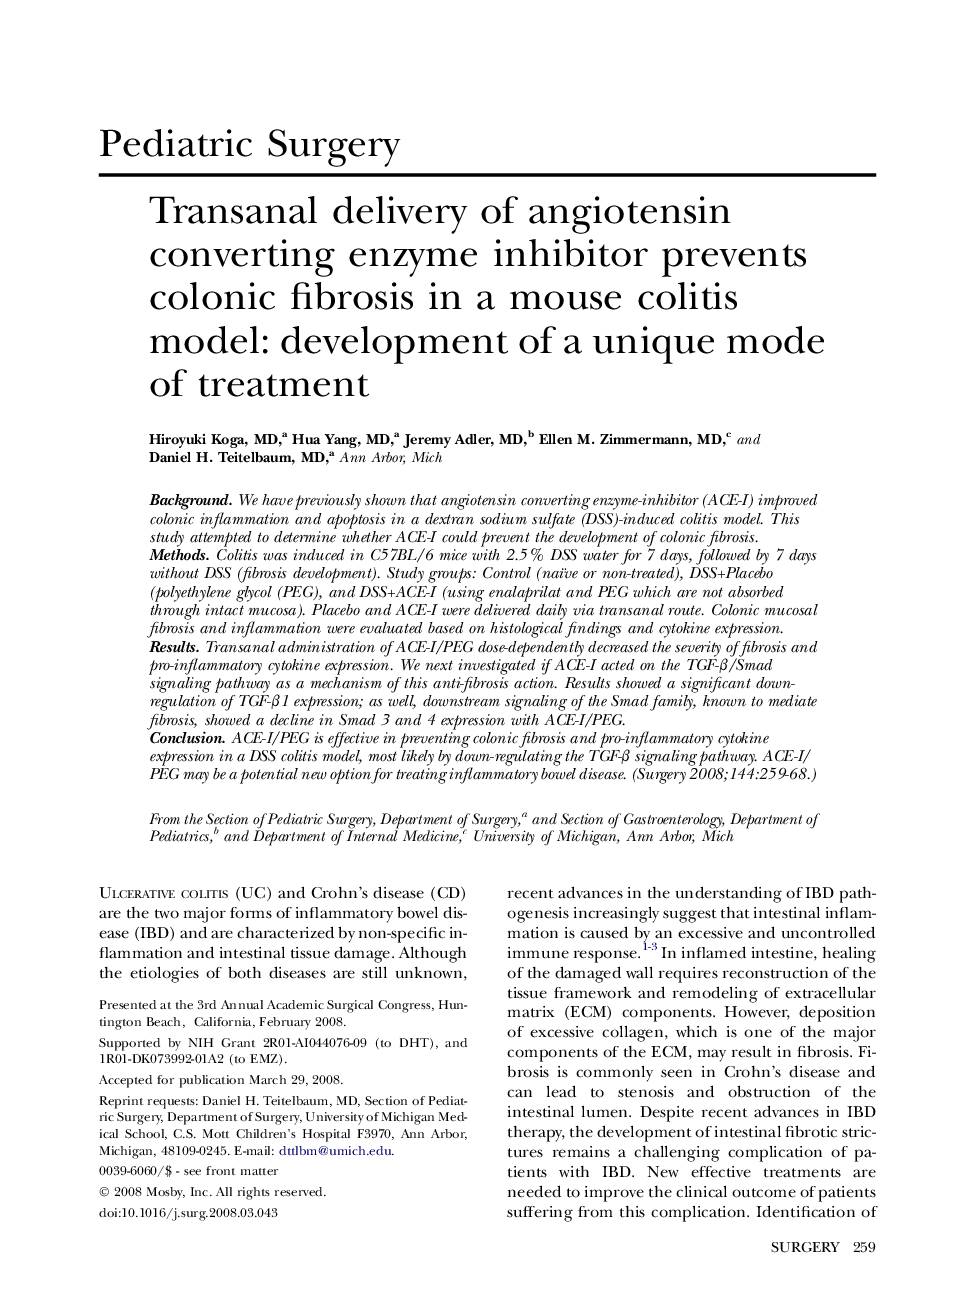 Transanal delivery of angiotensin converting enzyme inhibitor prevents colonic fibrosis in a mouse colitis model: development of a unique mode of treatment 